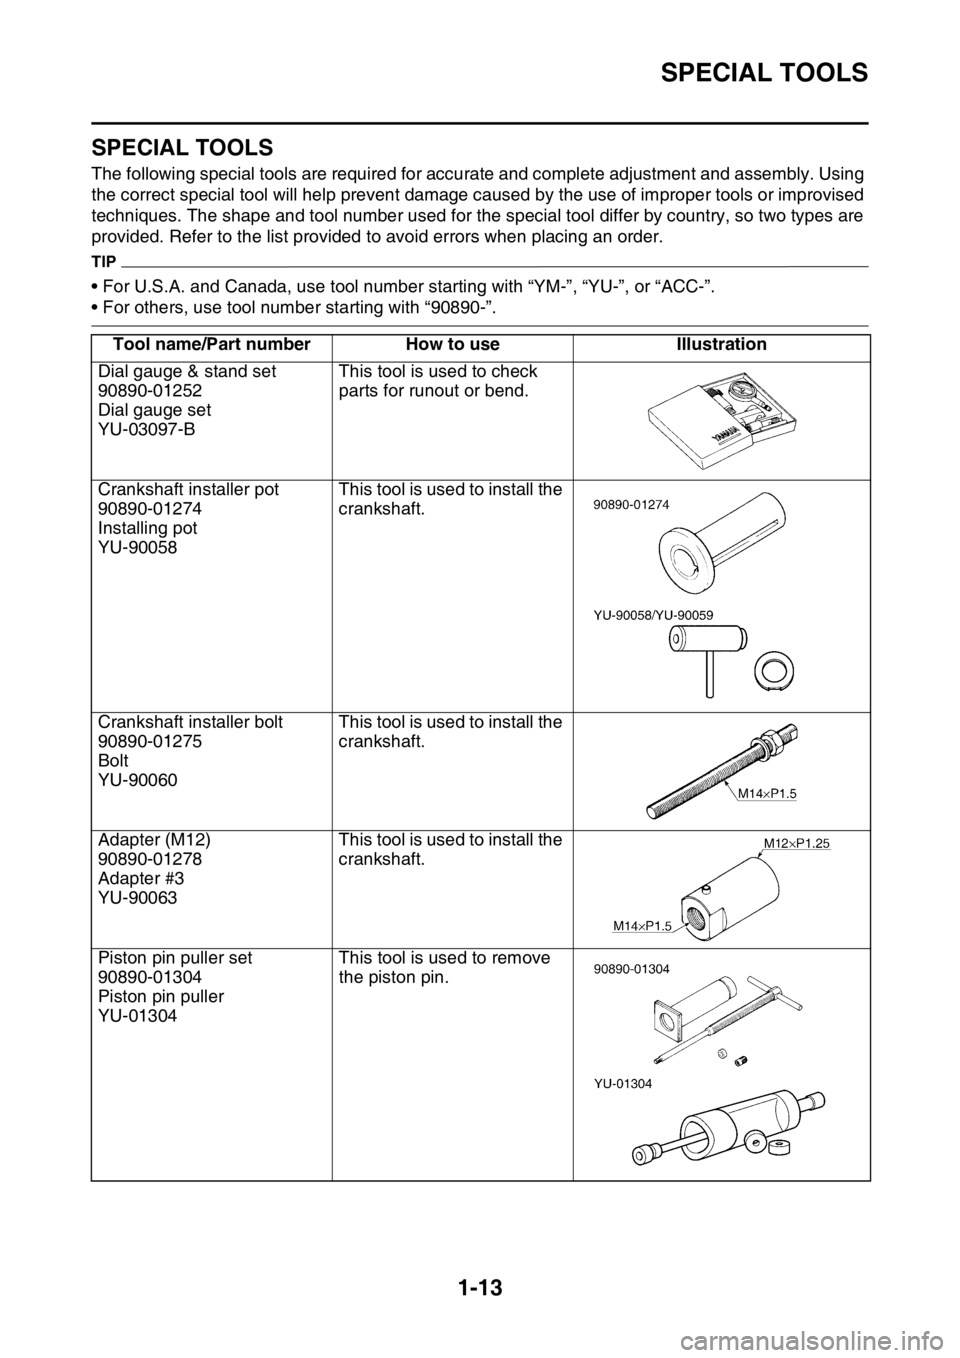 YAMAHA WR 450F 2016 Owners Manual SPECIAL TOOLS
1-13
EAS2GC1028
SPECIAL TOOLS
The following special tools are required for accurate and complete adjustment and assembly. Using 
the correct special tool will help prevent damage ca used